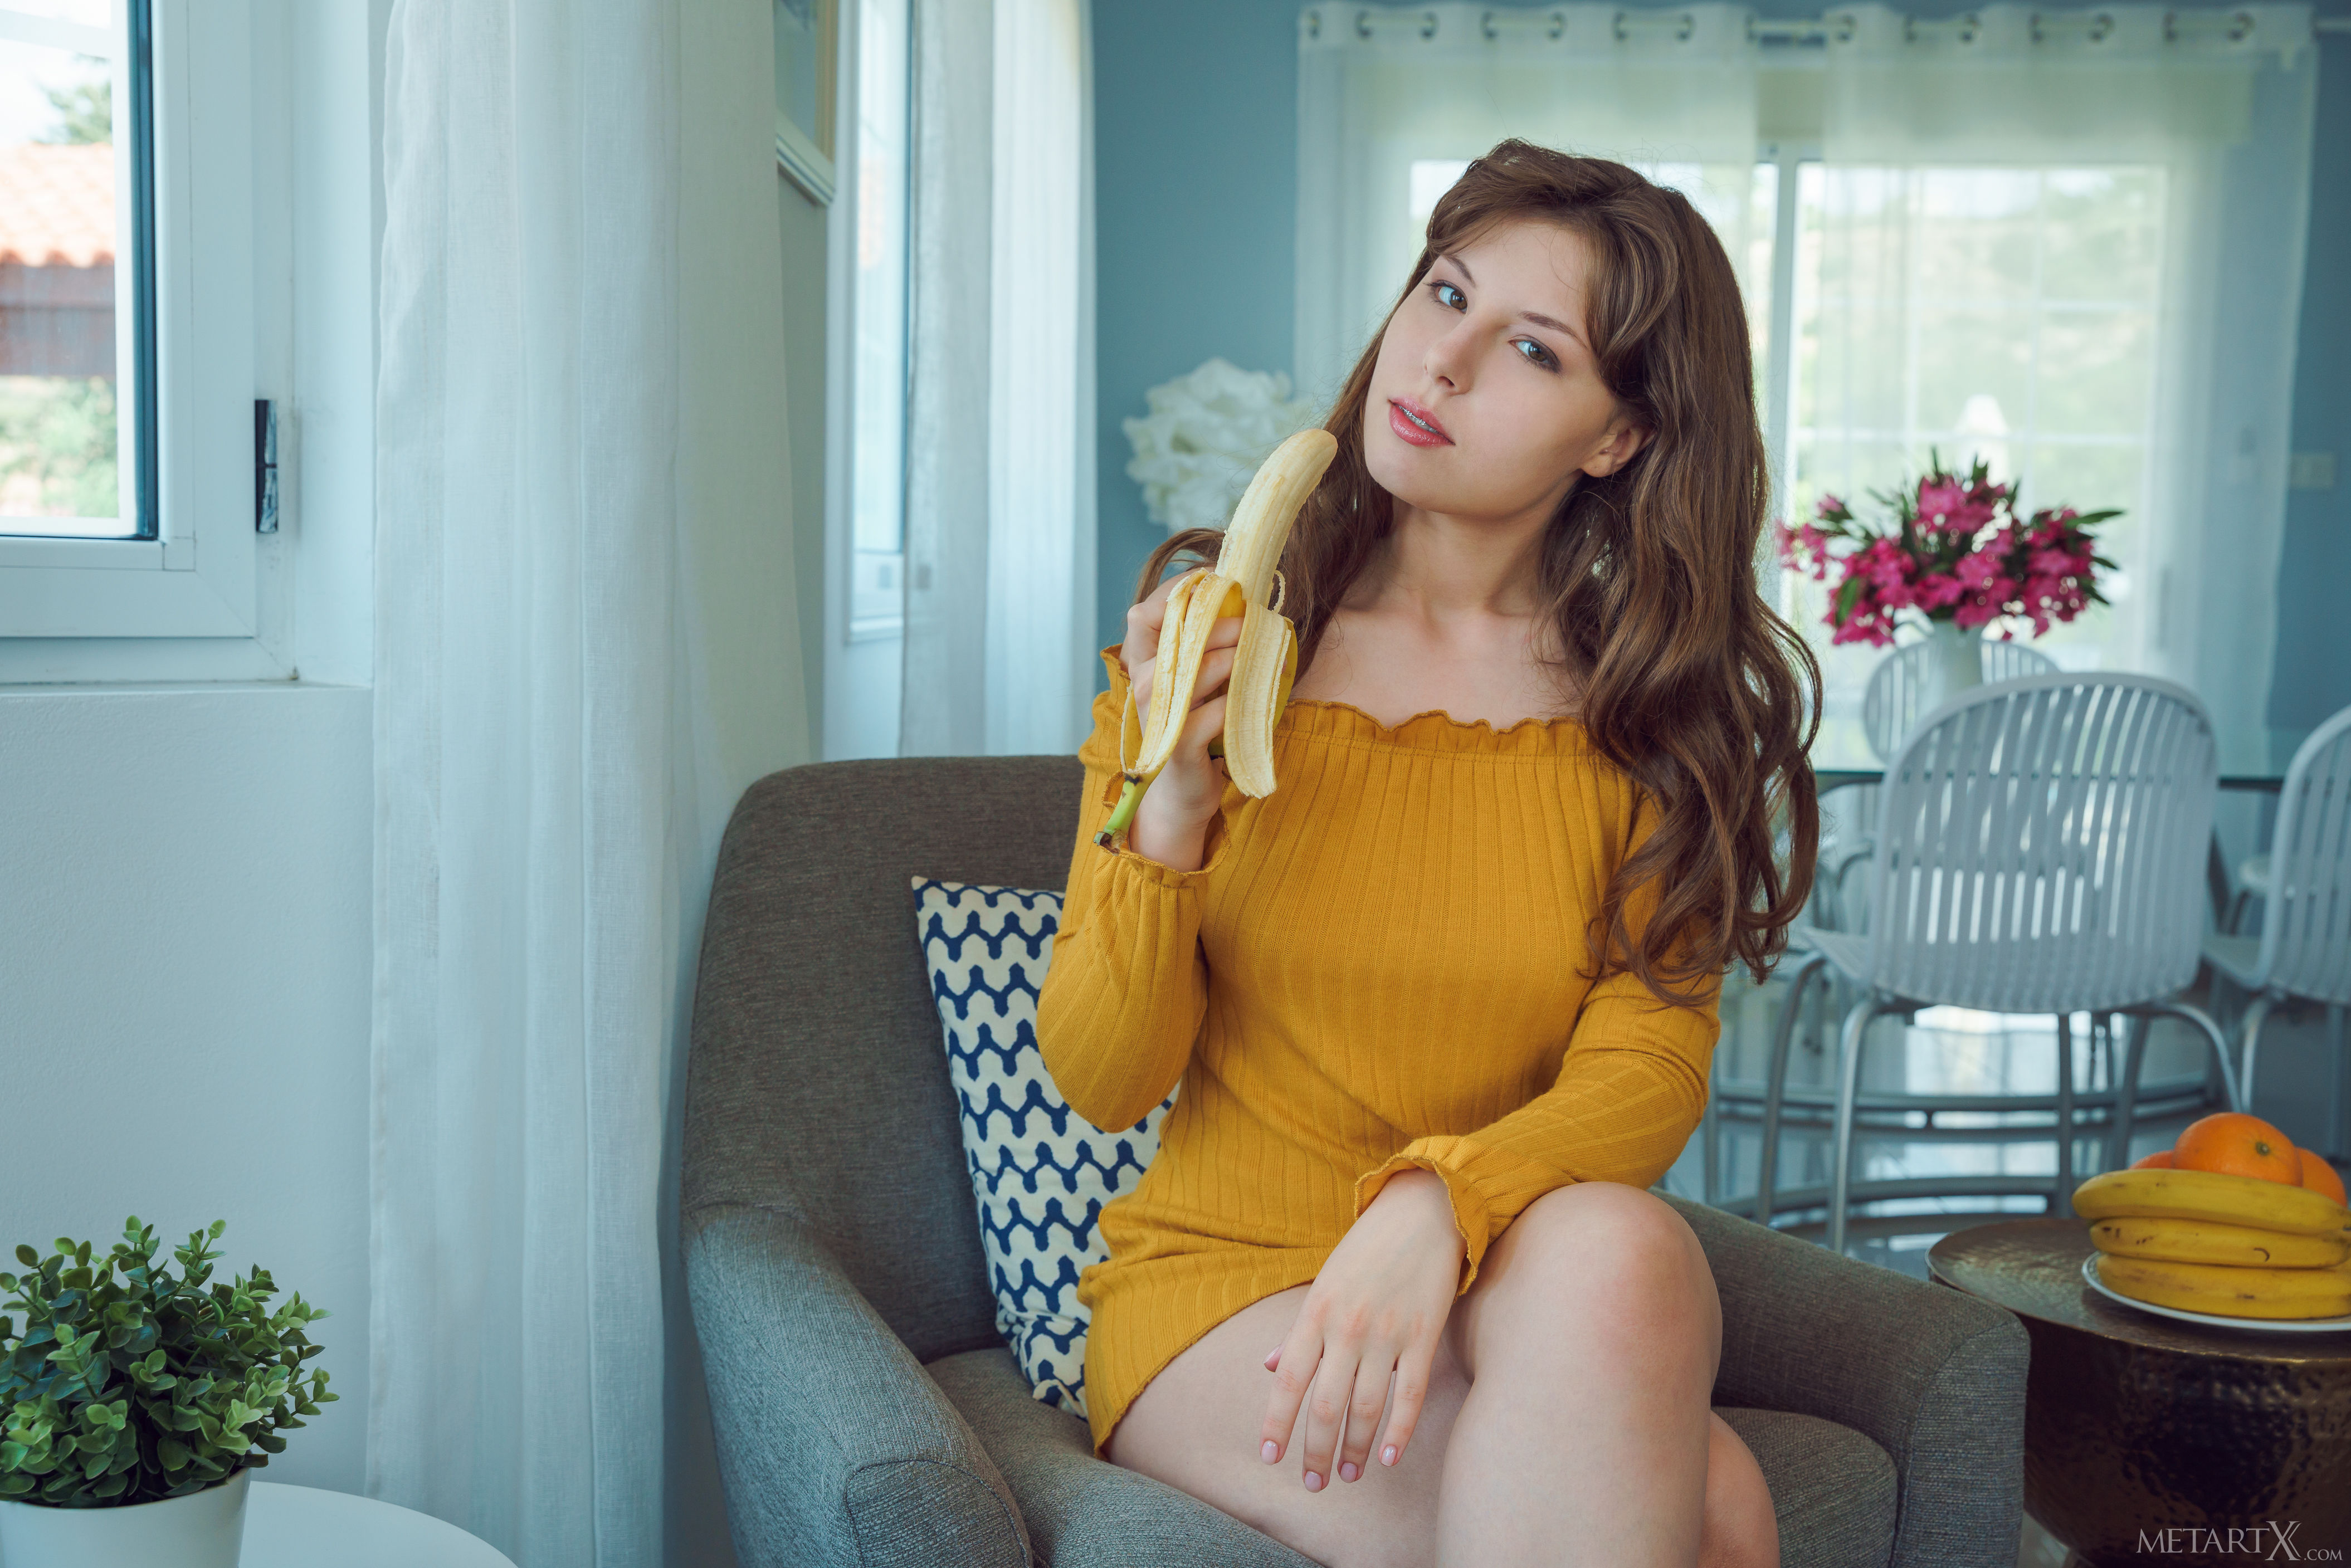 Women Brunette Long Hair Living Rooms Armchairs Curtains Chair Bananas Blouse Sweater Brown Eyes Eat 4220x2815